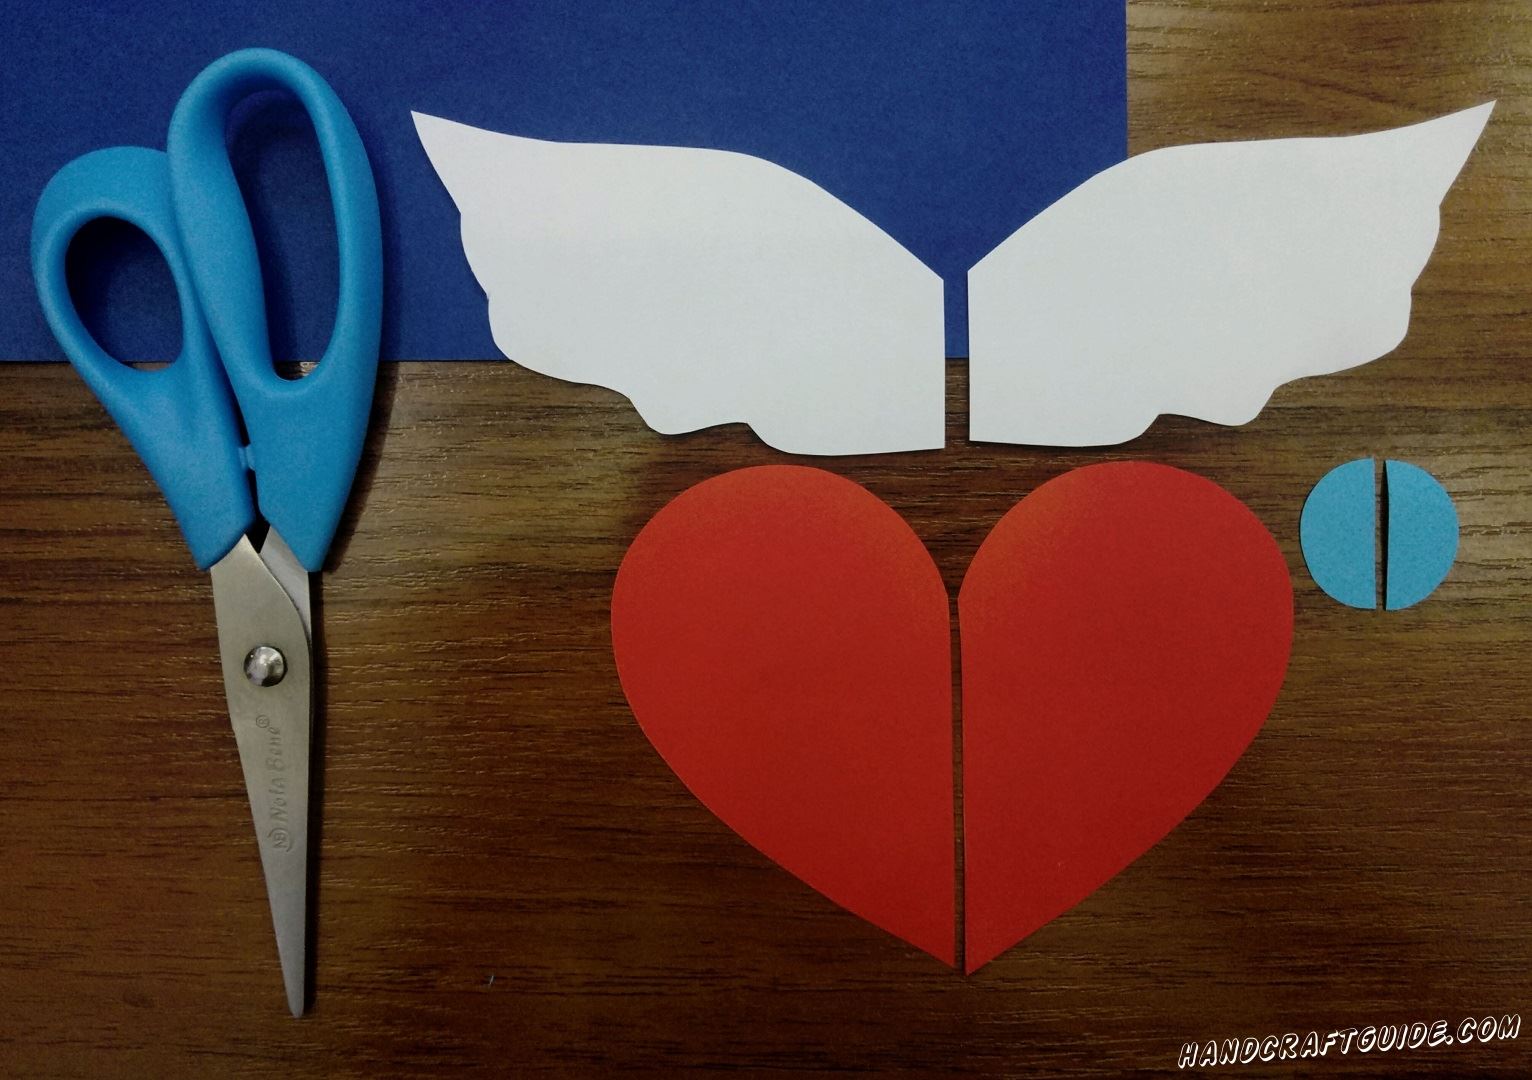 First cut out a large red heart and cut it in half. Then cut the wings out of white paper and also cut out a small blue circle and cut in half. 